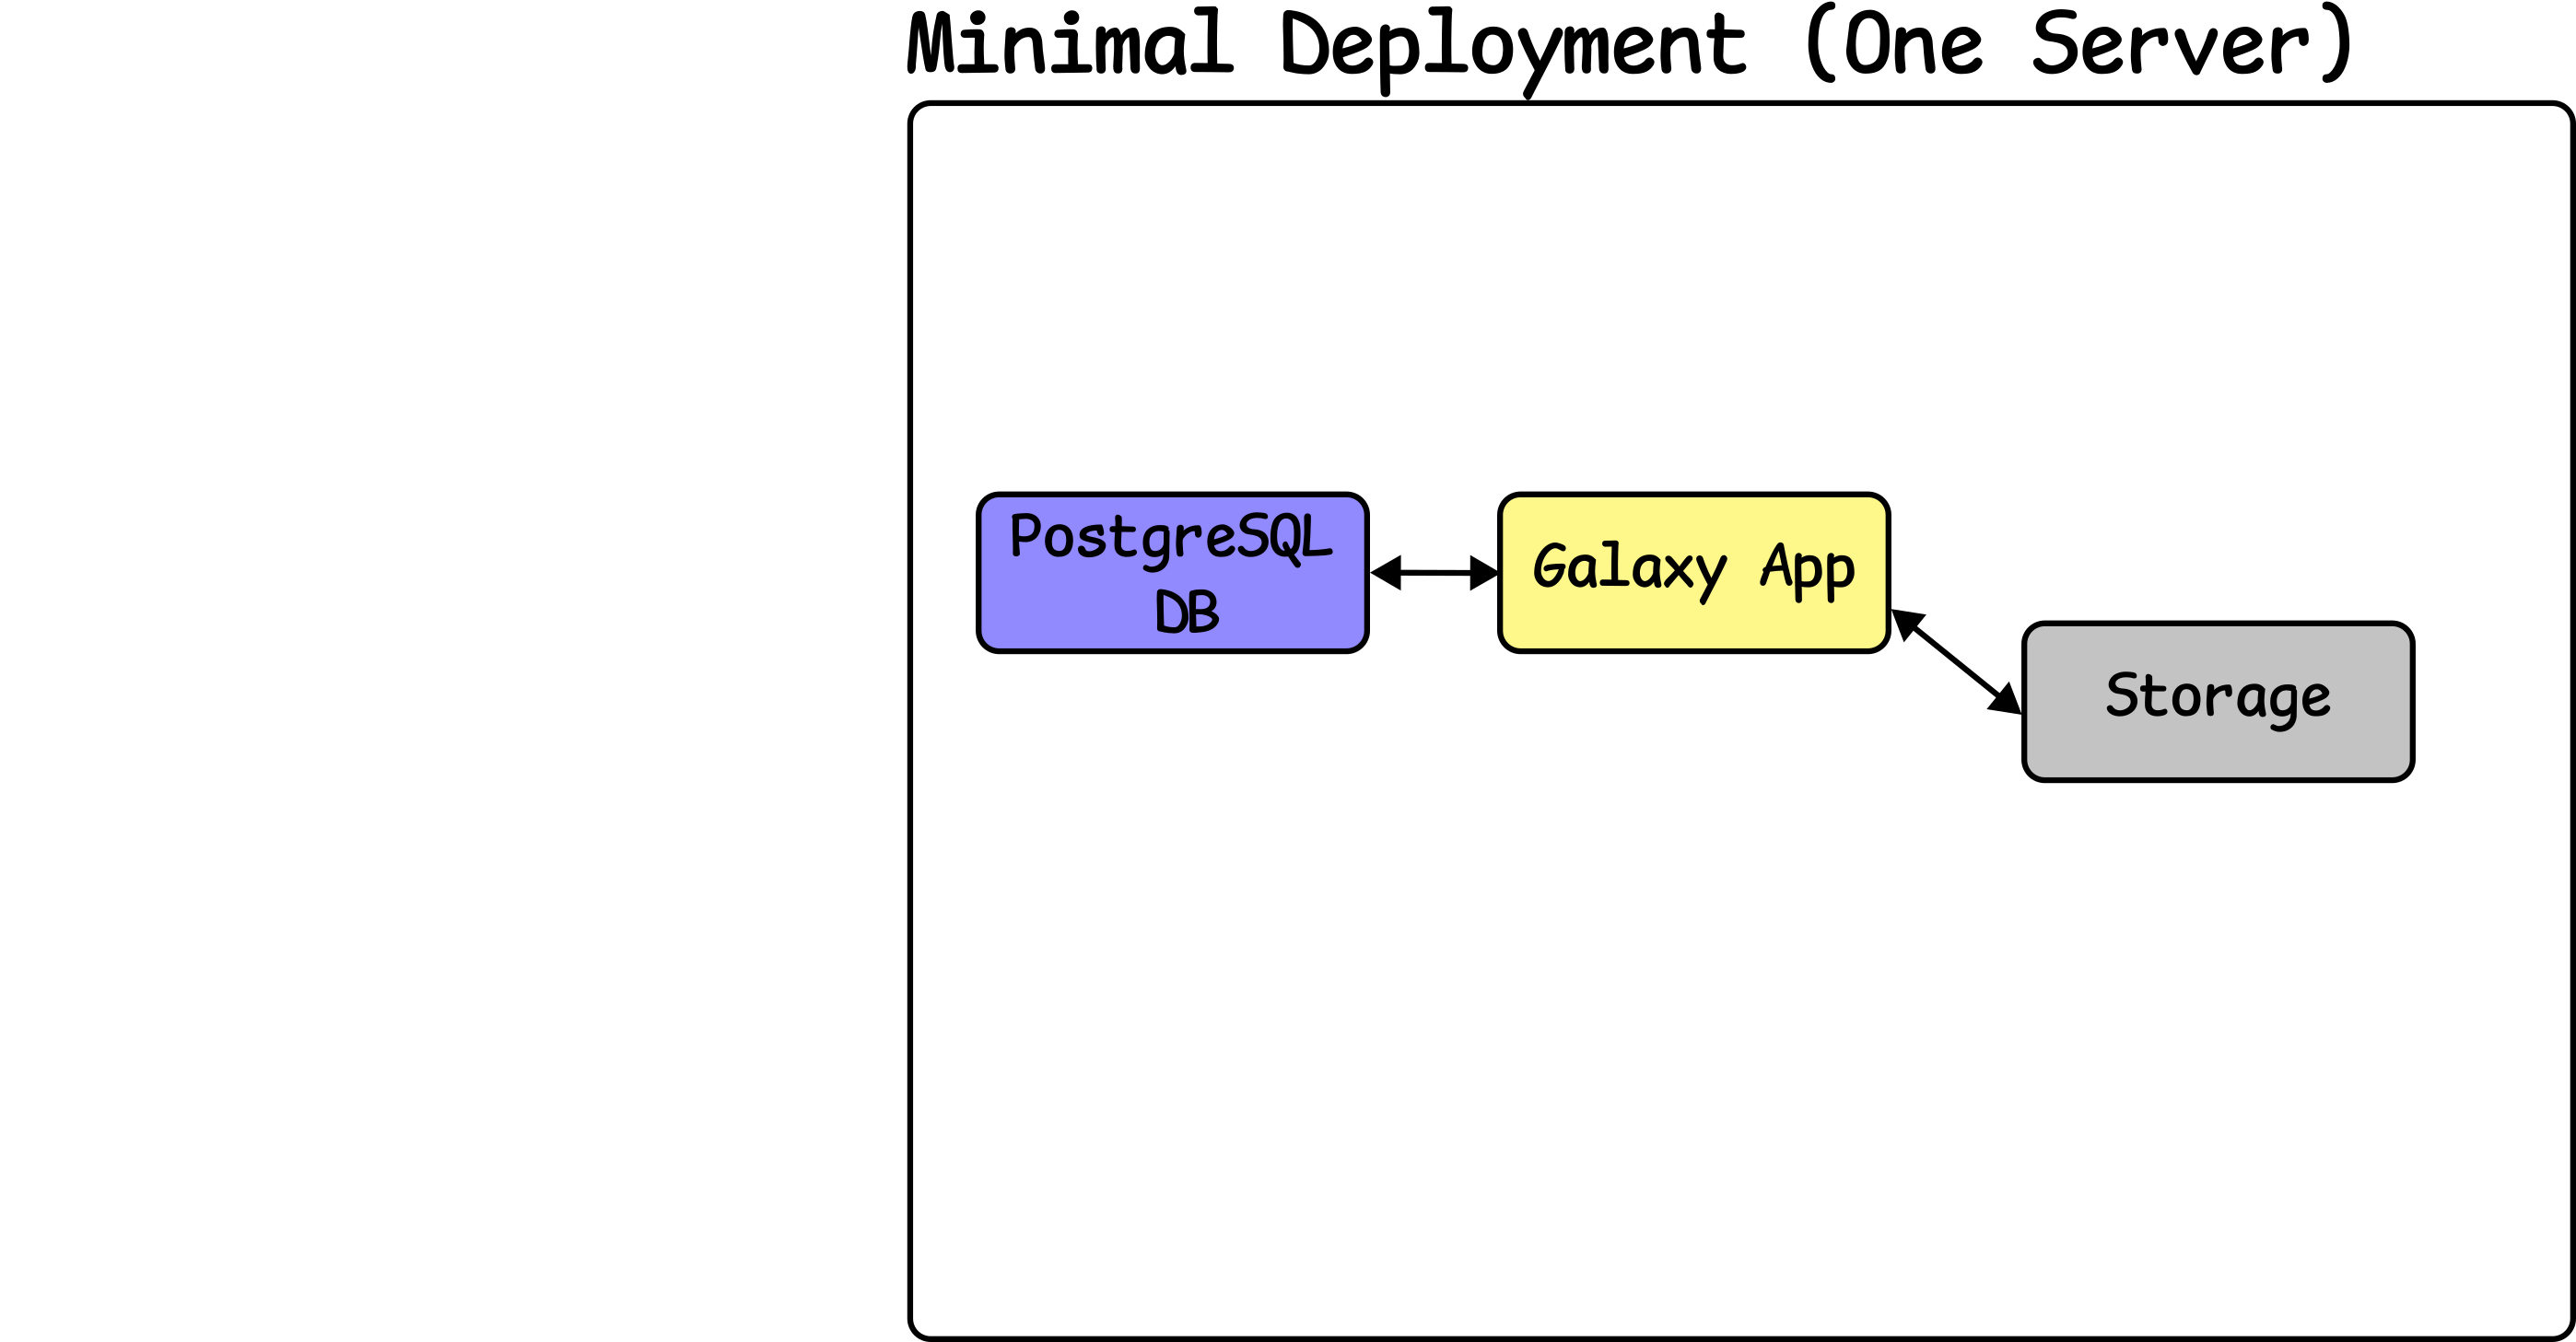 Galaxy is now attached to the DB. Storage is connected to Galaxy